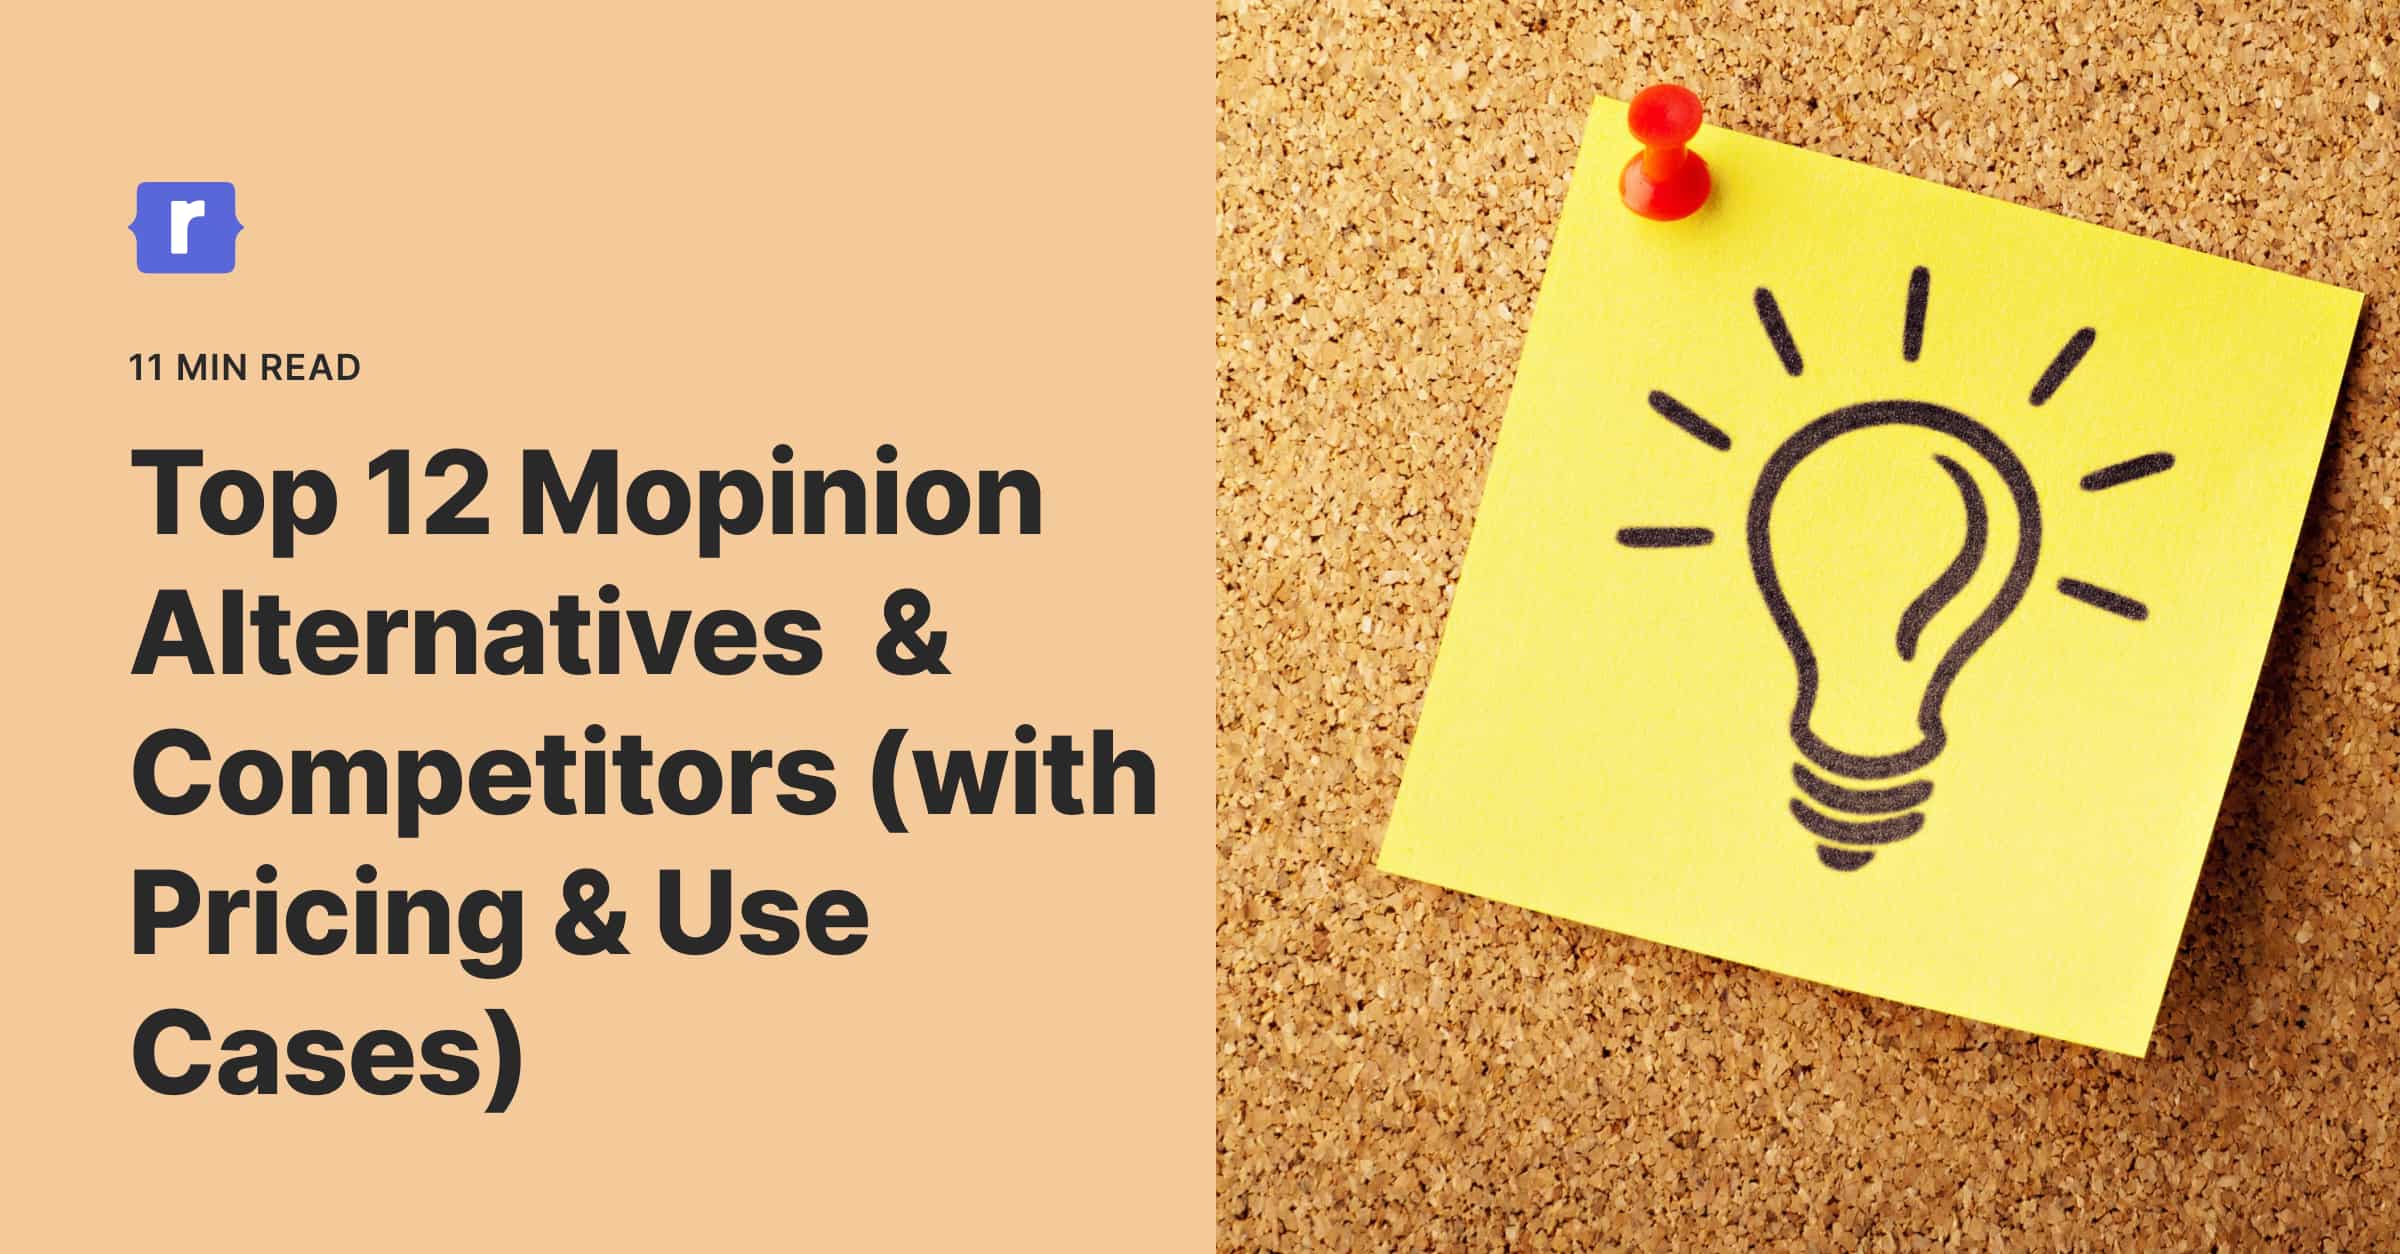 Top 12 Mopinion Alternatives & Competitors For Managing Customer Feedback